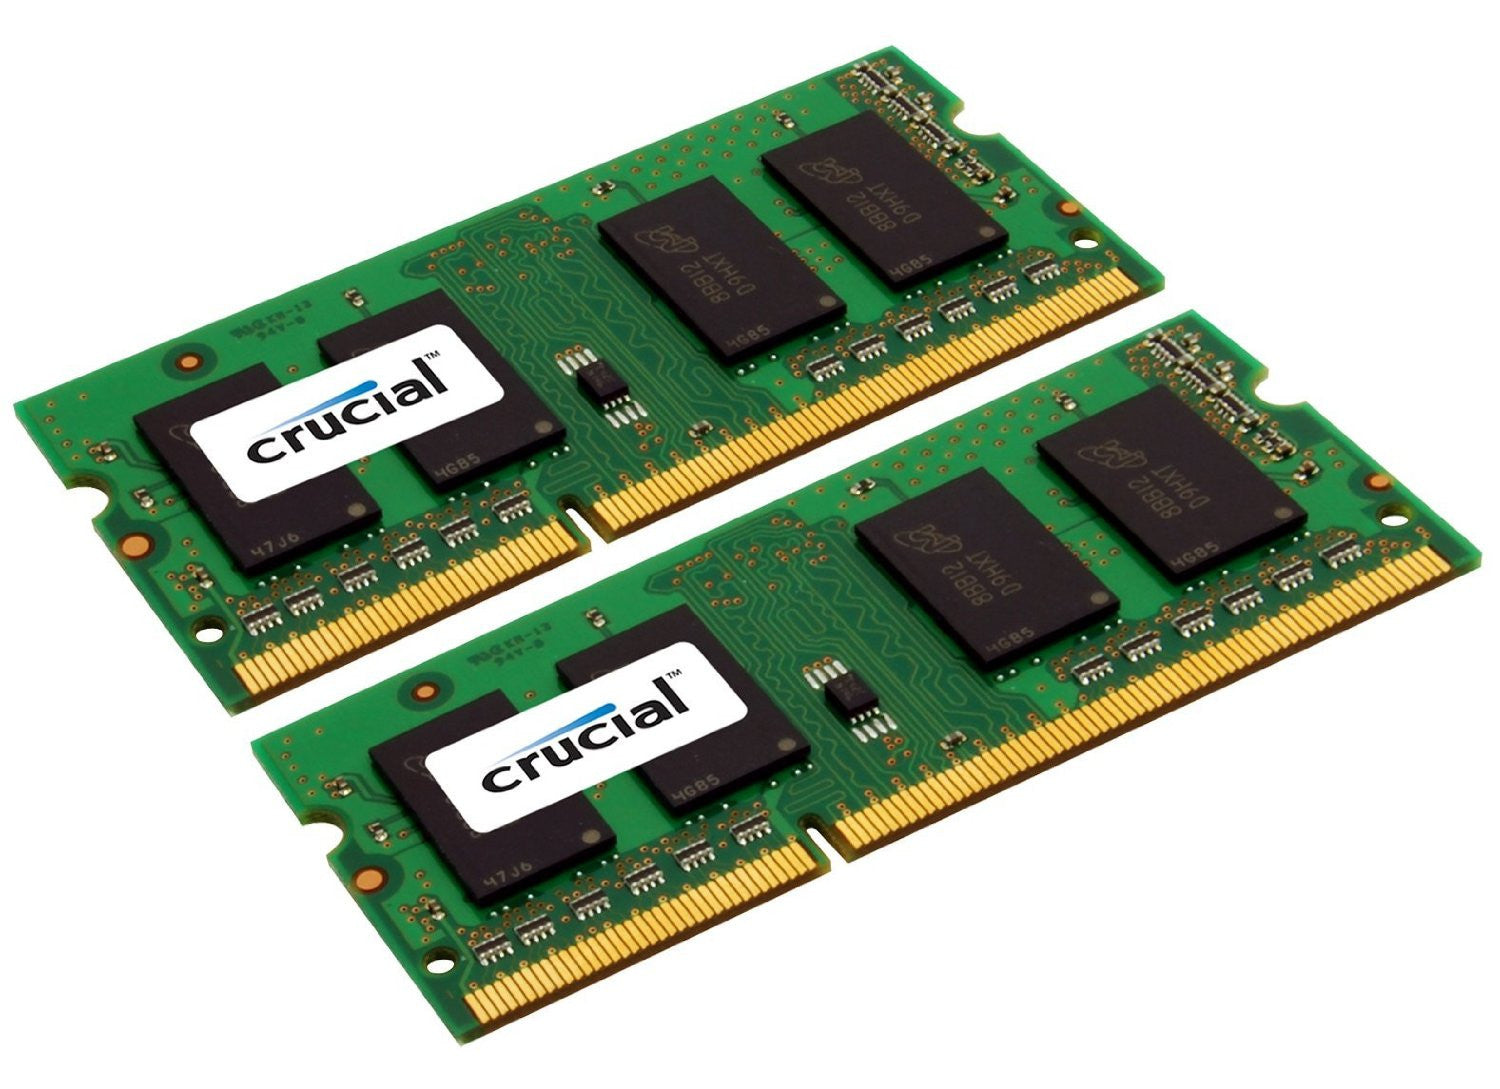 Crucial DDR3 1600 MT/s (PC3-12800) 204-Pin Memory Modules